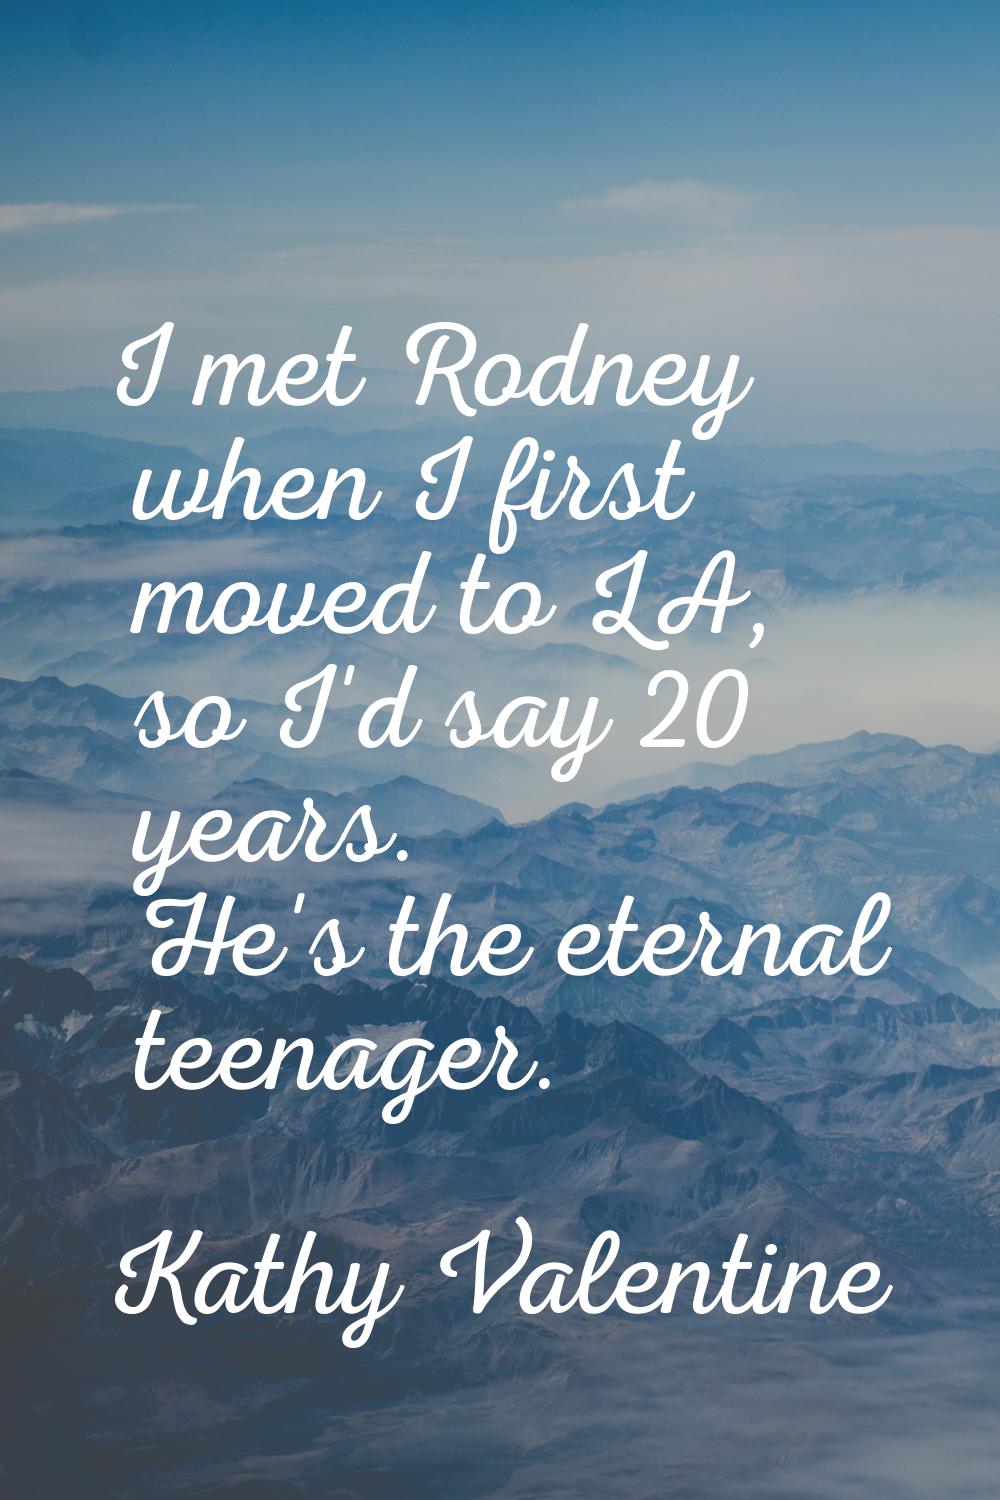 I met Rodney when I first moved to LA, so I'd say 20 years. He's the eternal teenager.